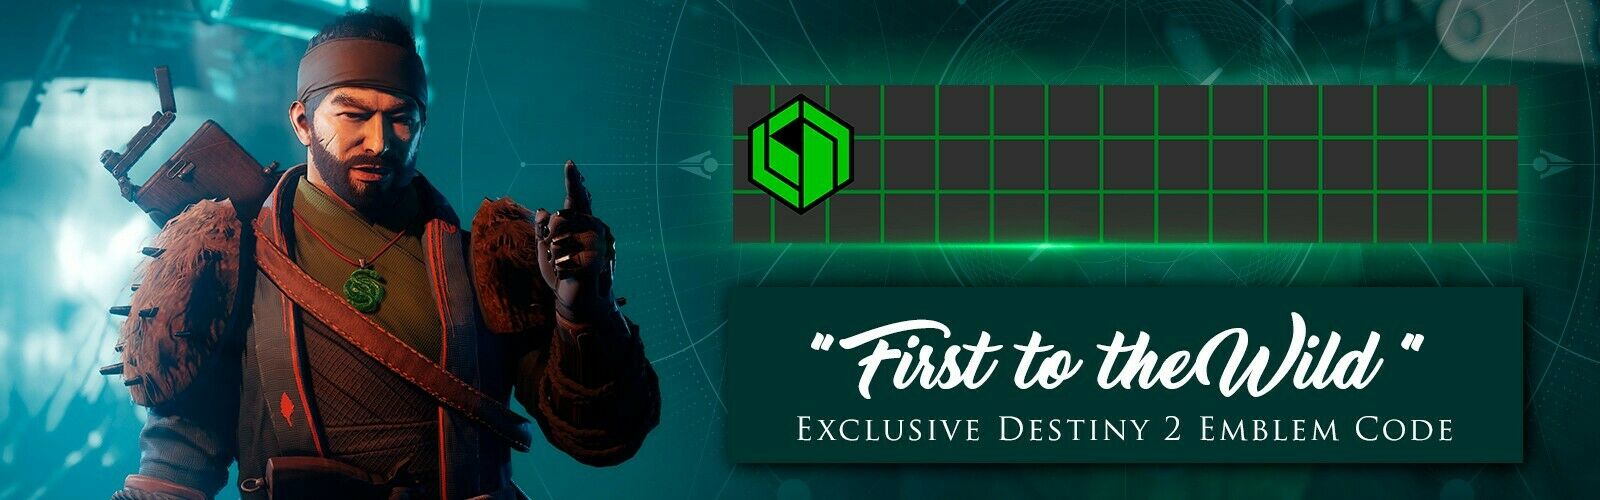 Destiny 2 First to the Wild Emblem in Hand! Messaged within Hours.